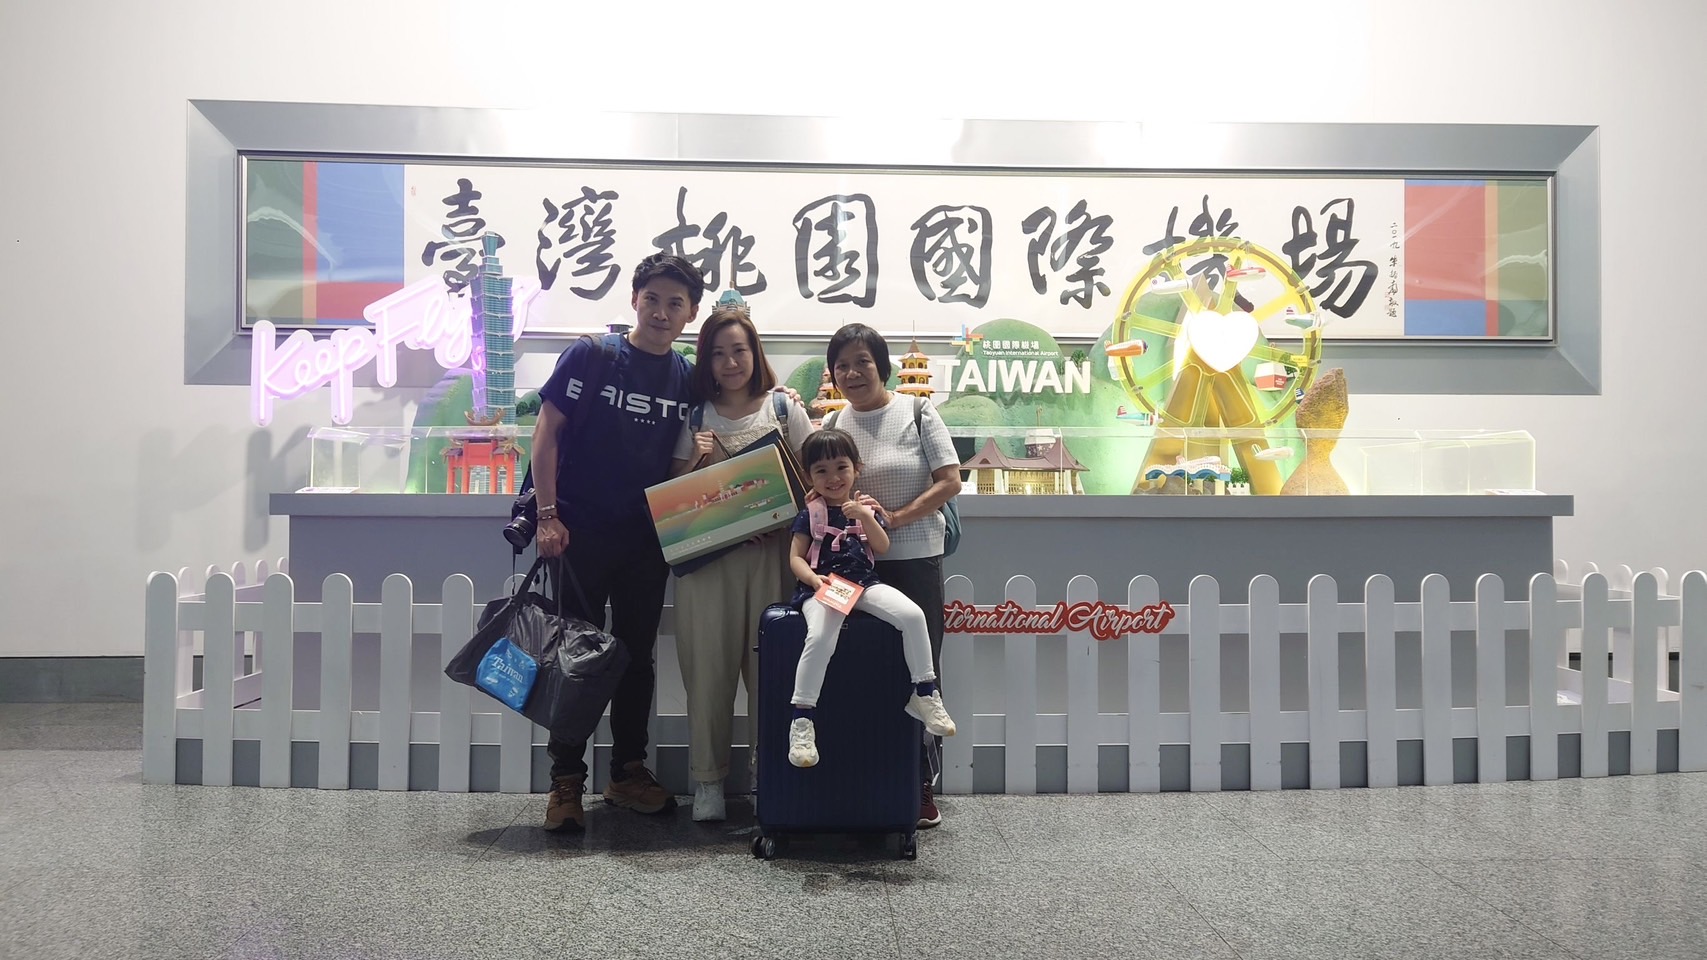 Taiwan's tourism market is recovering, and the Tourism Bureau welcomes the 2 millionth visitor to Taiwan this year!